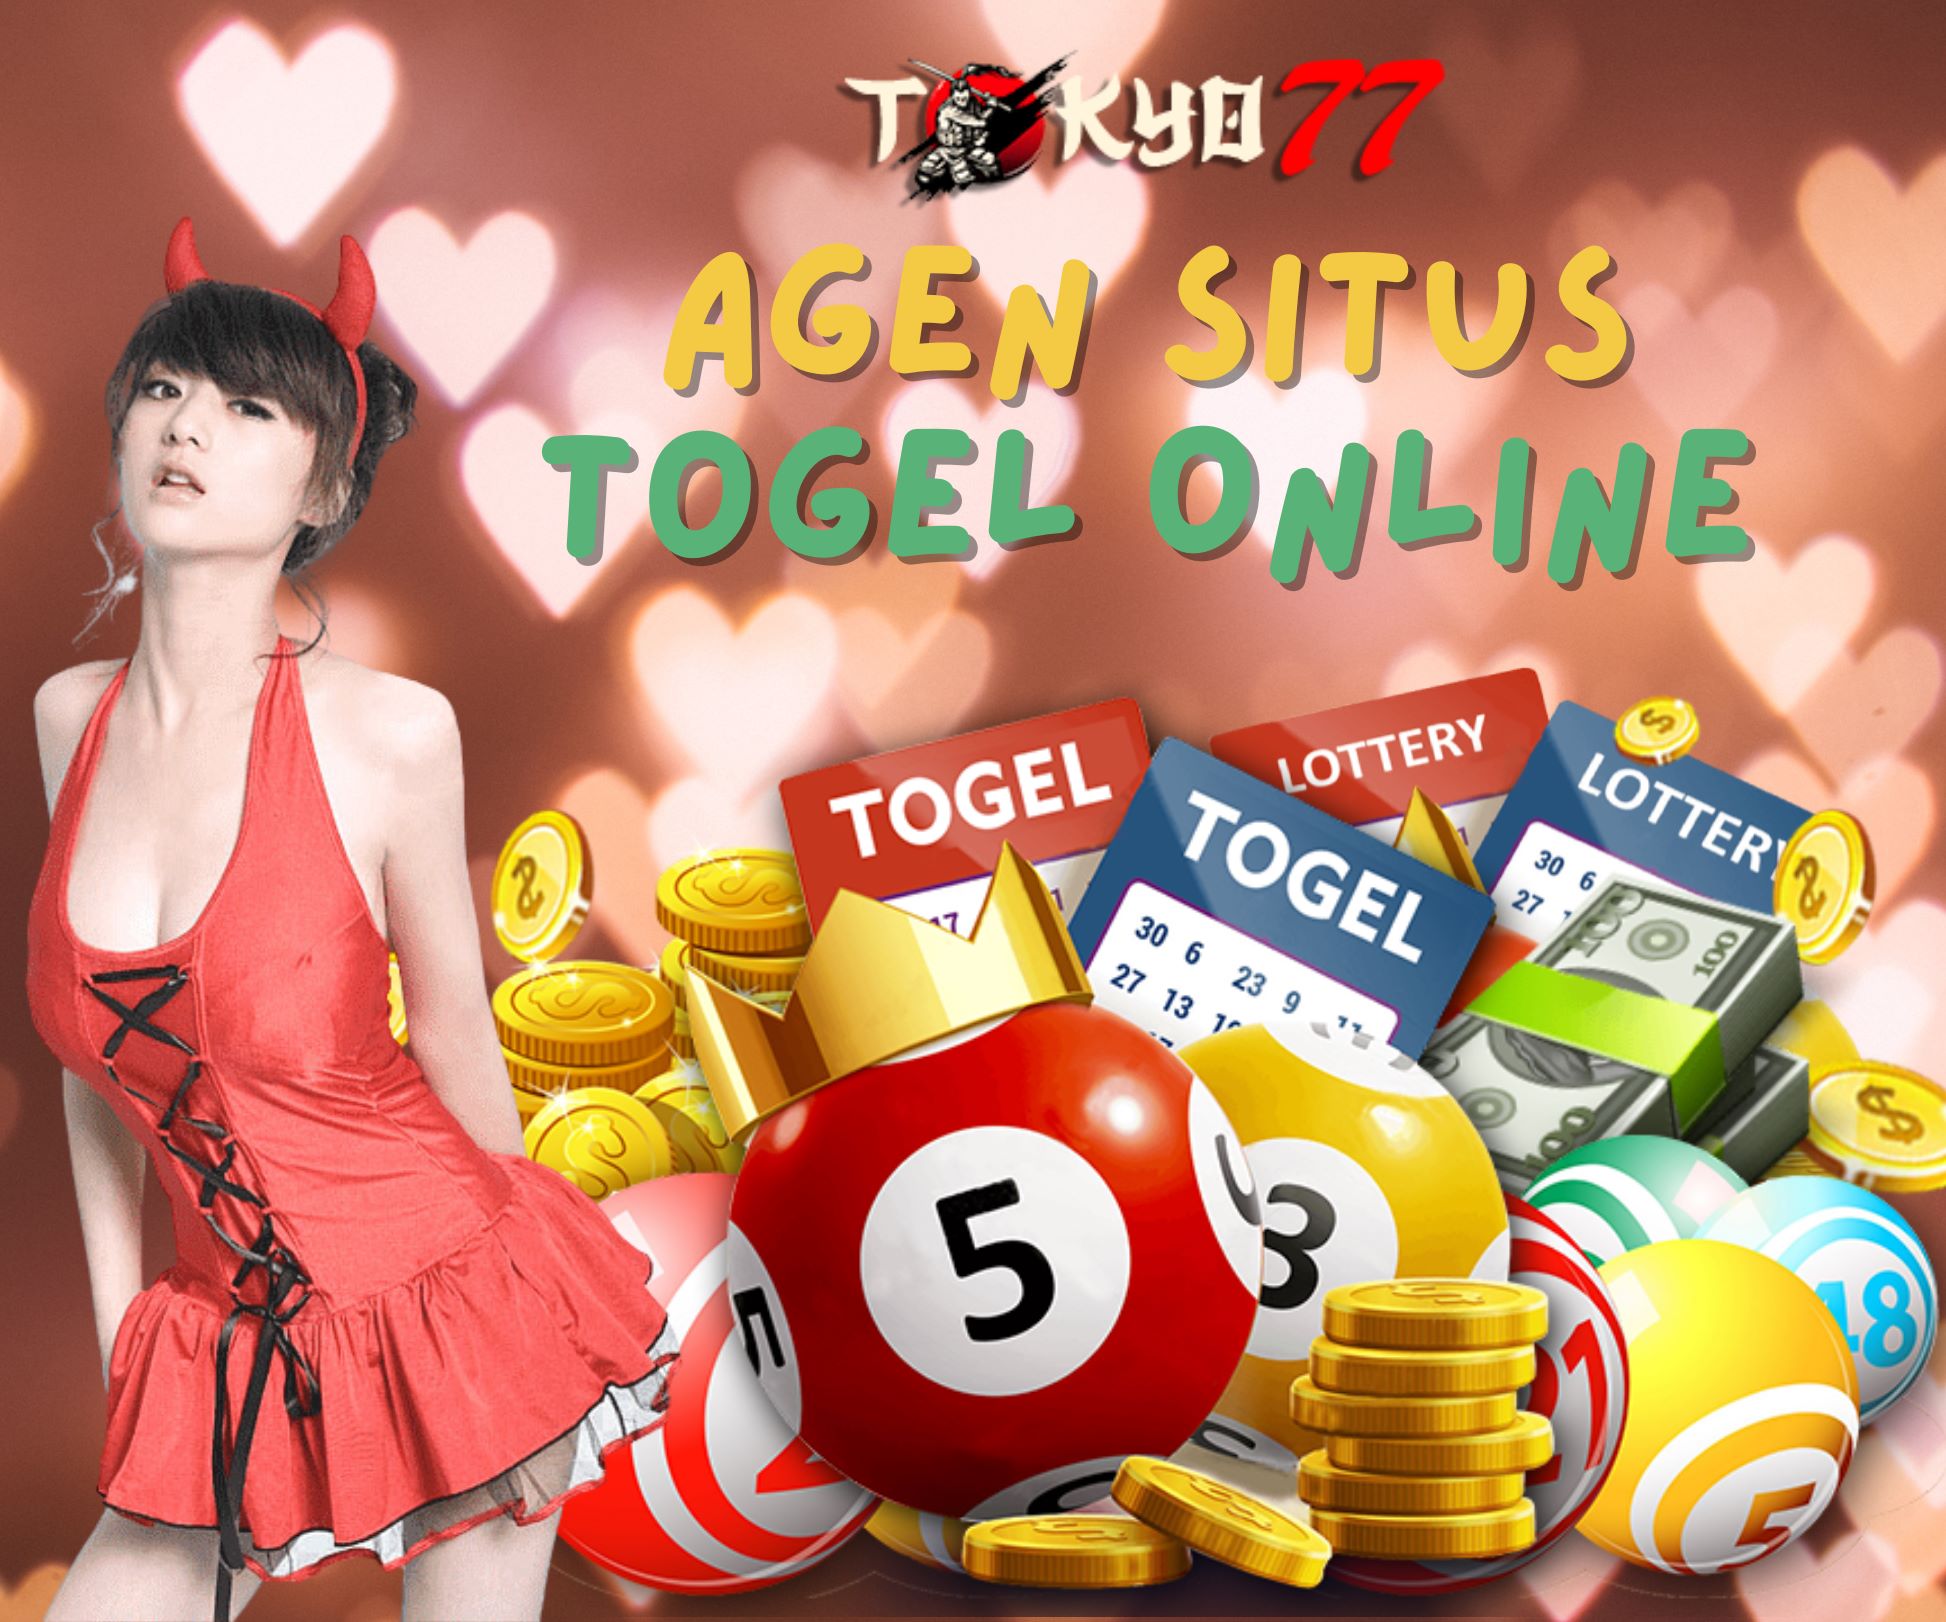 Looking for the True Meaning of Dreams from Togel